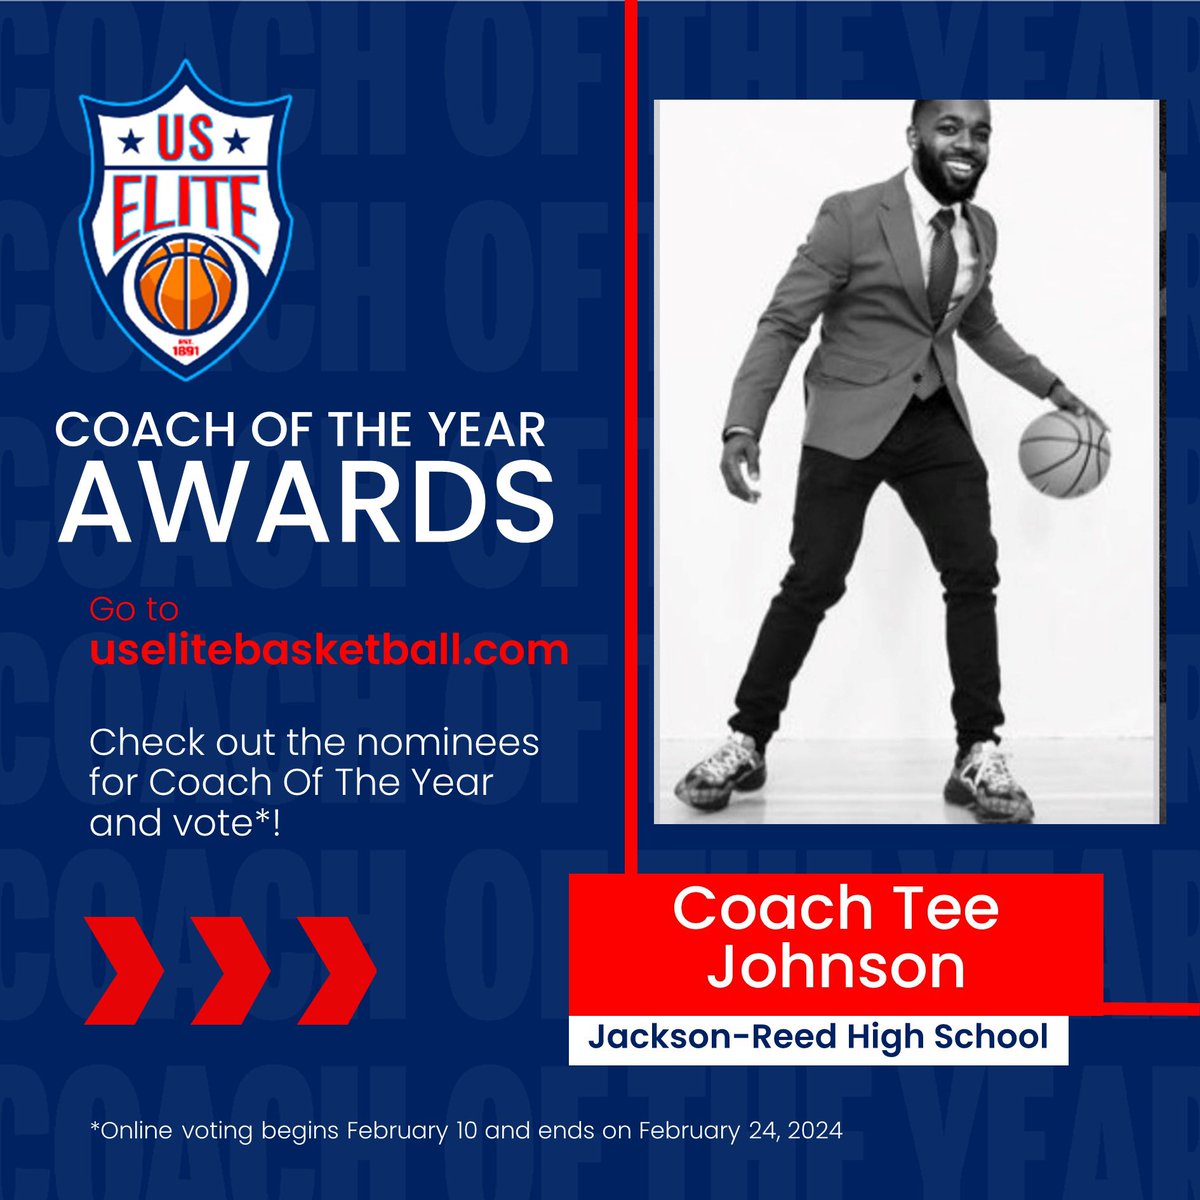 Congratulations to Coach Tee Johnson of Jackson- Reed High School for being nominated as Coach of the Year! #uselitebasketball